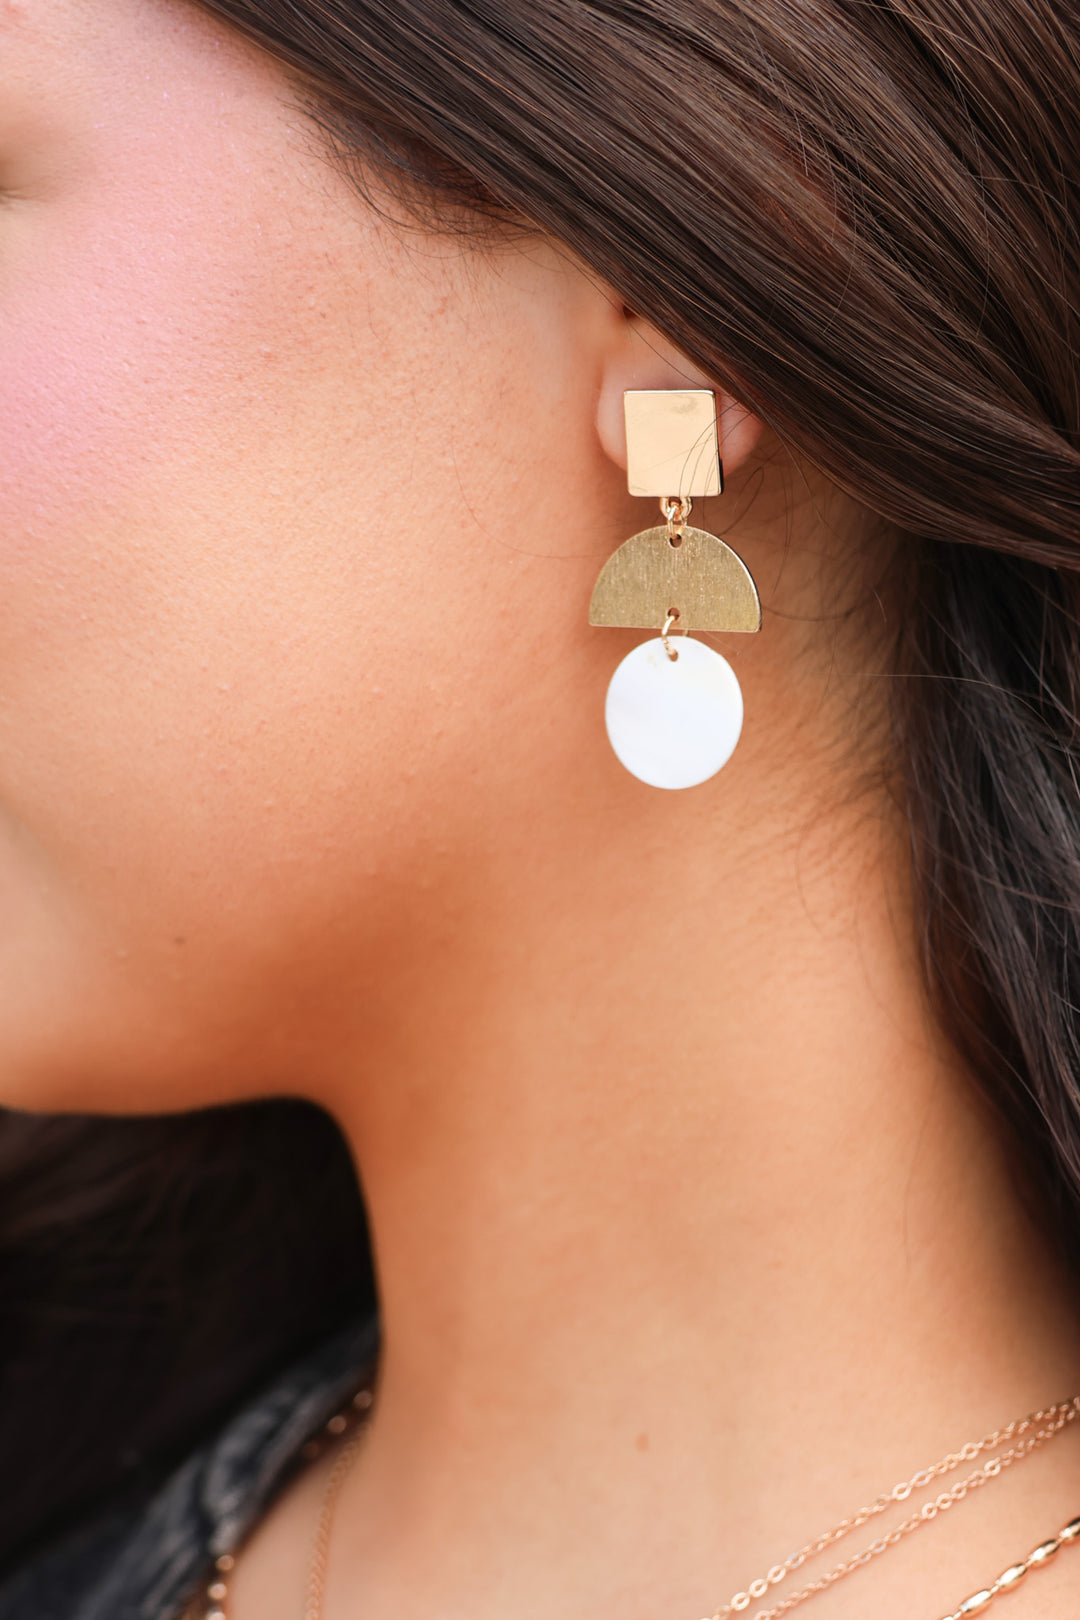 Vacation Mode Earrings - ShopSpoiled